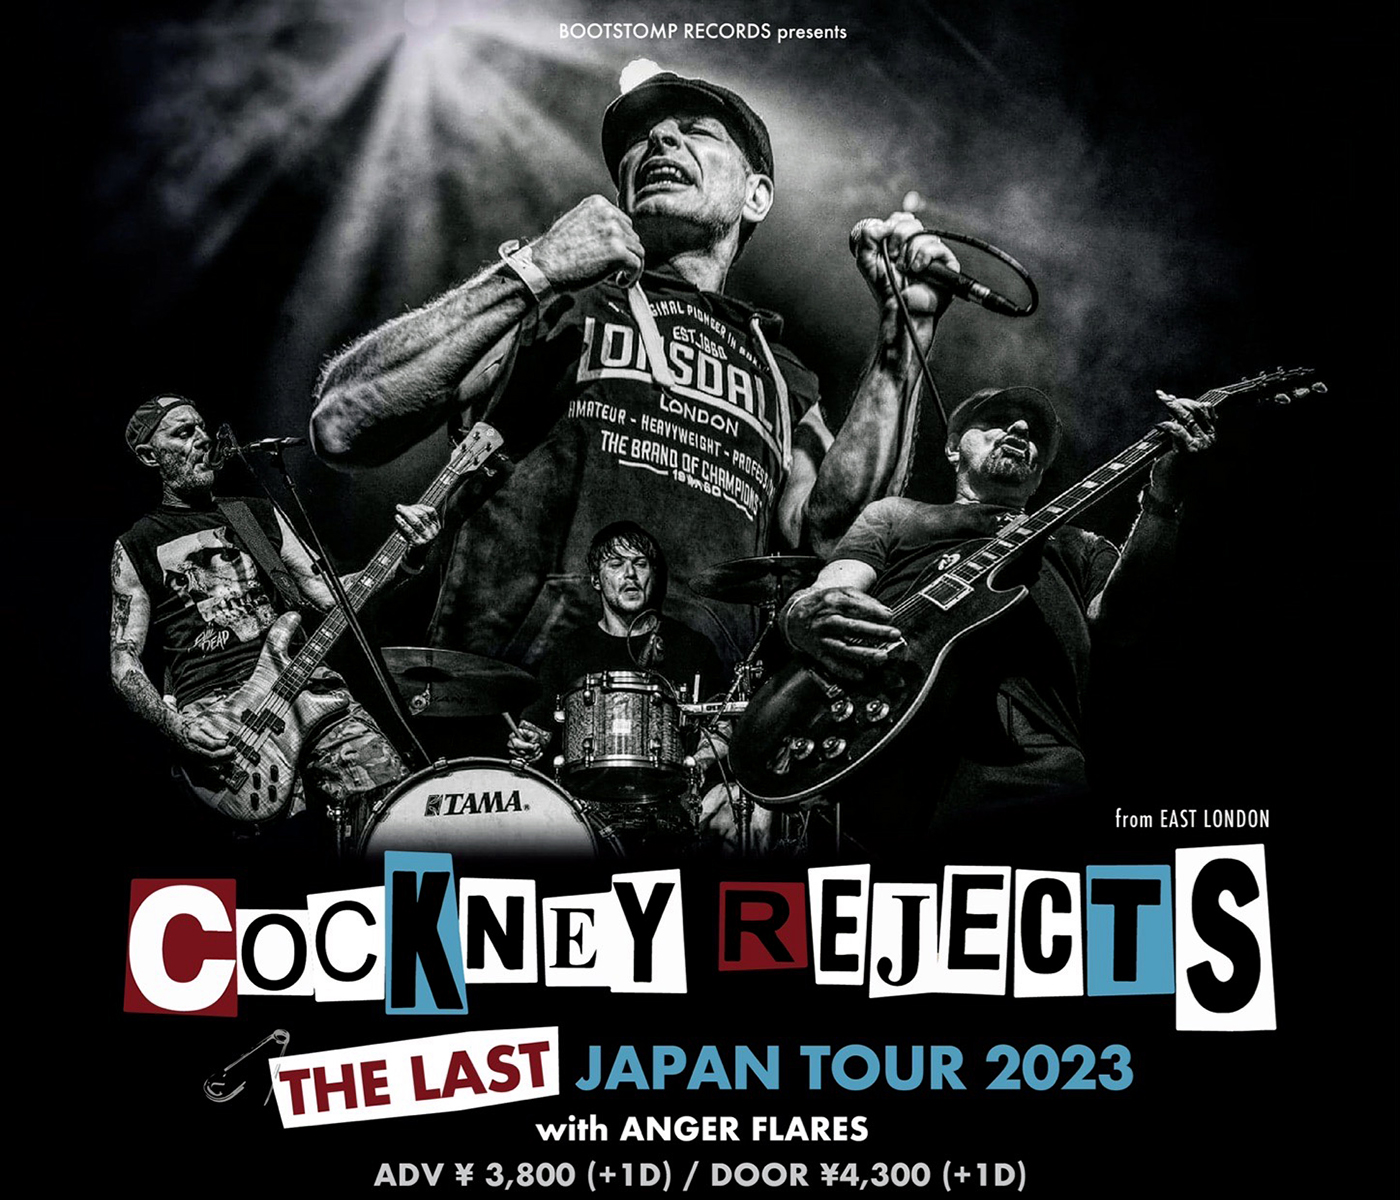 COCKNEY REJECTS “THE LAST” JAPAN TOUR 2023